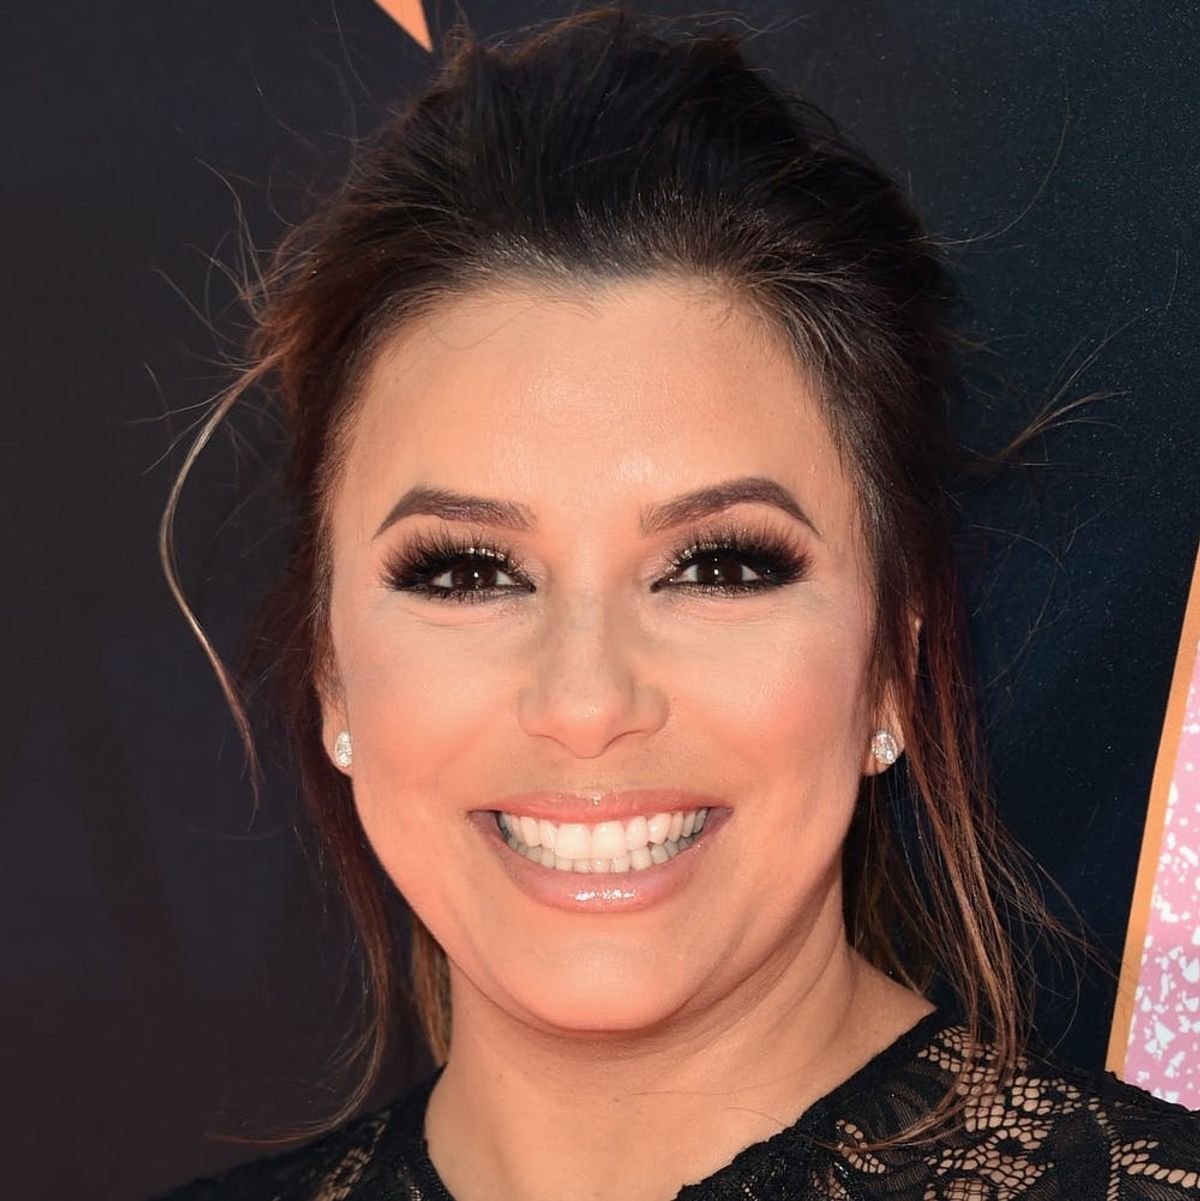 Eva Longoria Admits That She’s “Nervous” But “Excited” About Giving Birth